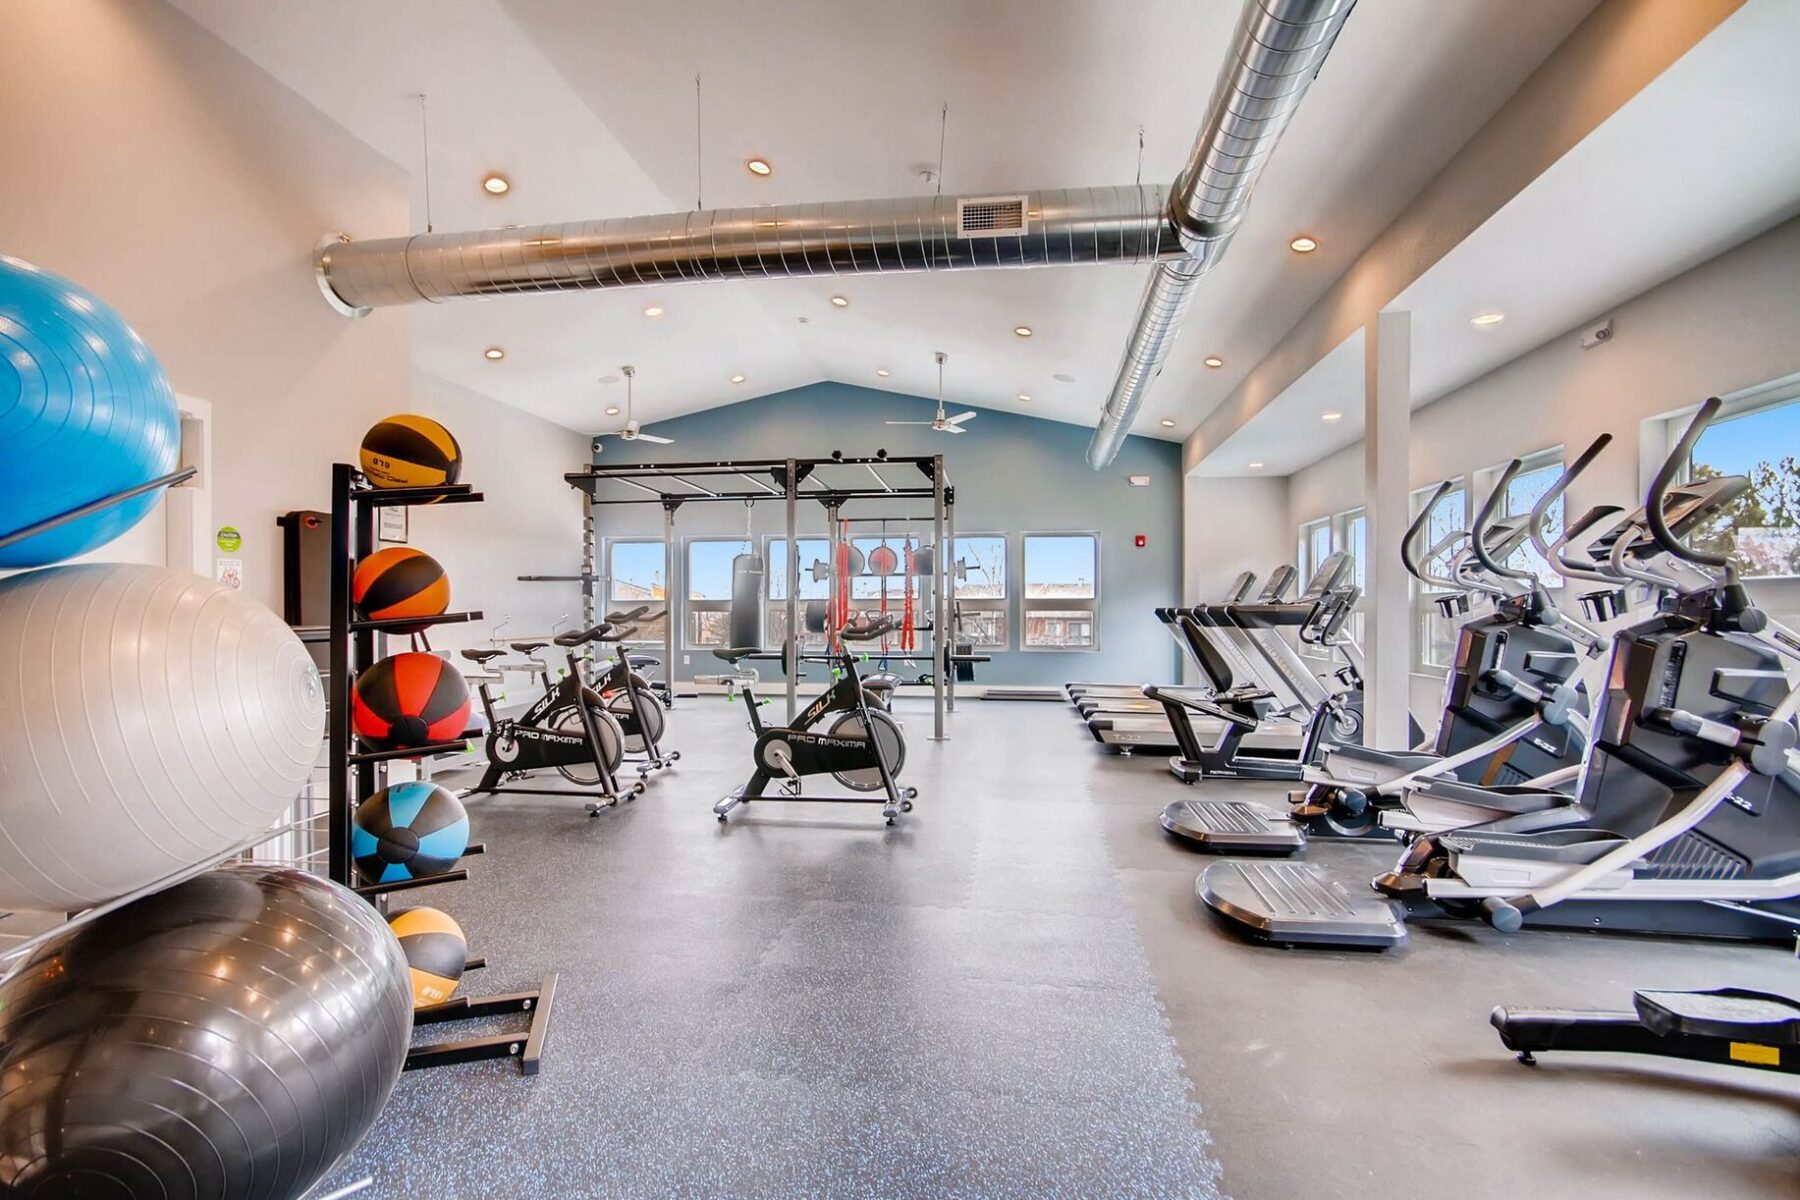 Fitness center with free weights, cardio equipment, punching bag, and yoga equipment